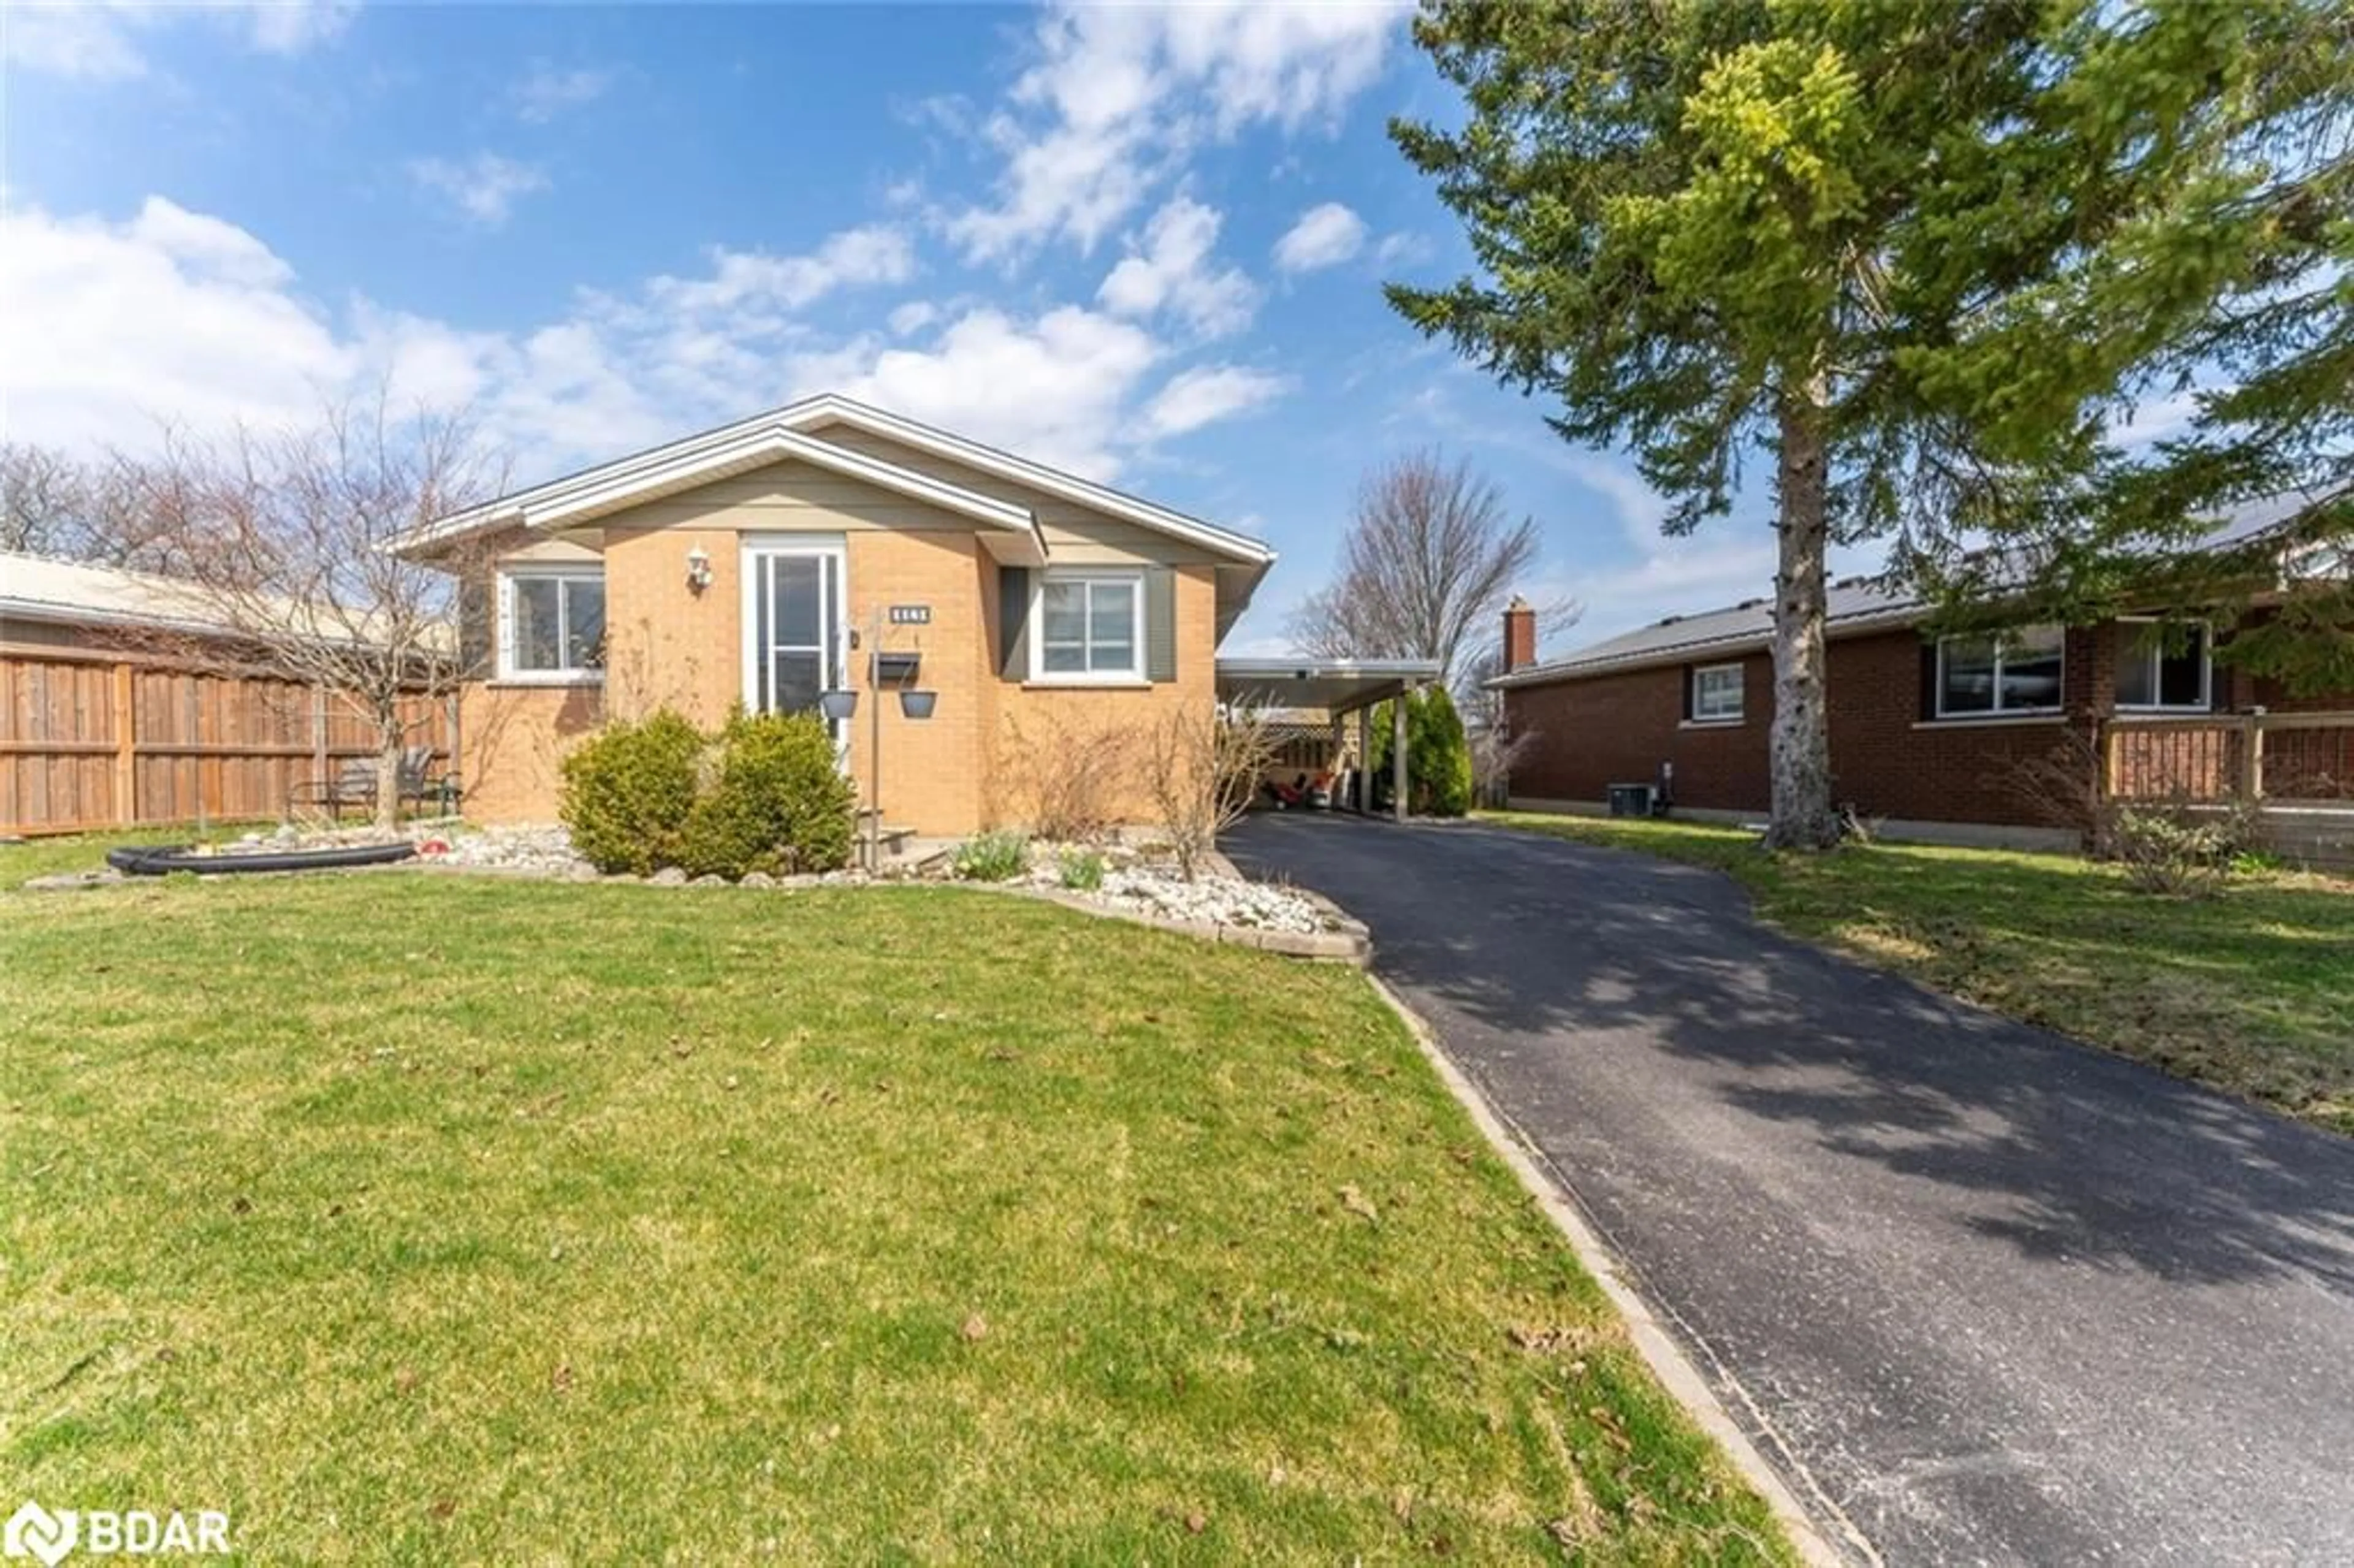 Frontside or backside of a home for 1141 Sprucedale Rd, Woodstock Ontario N4S 5A1